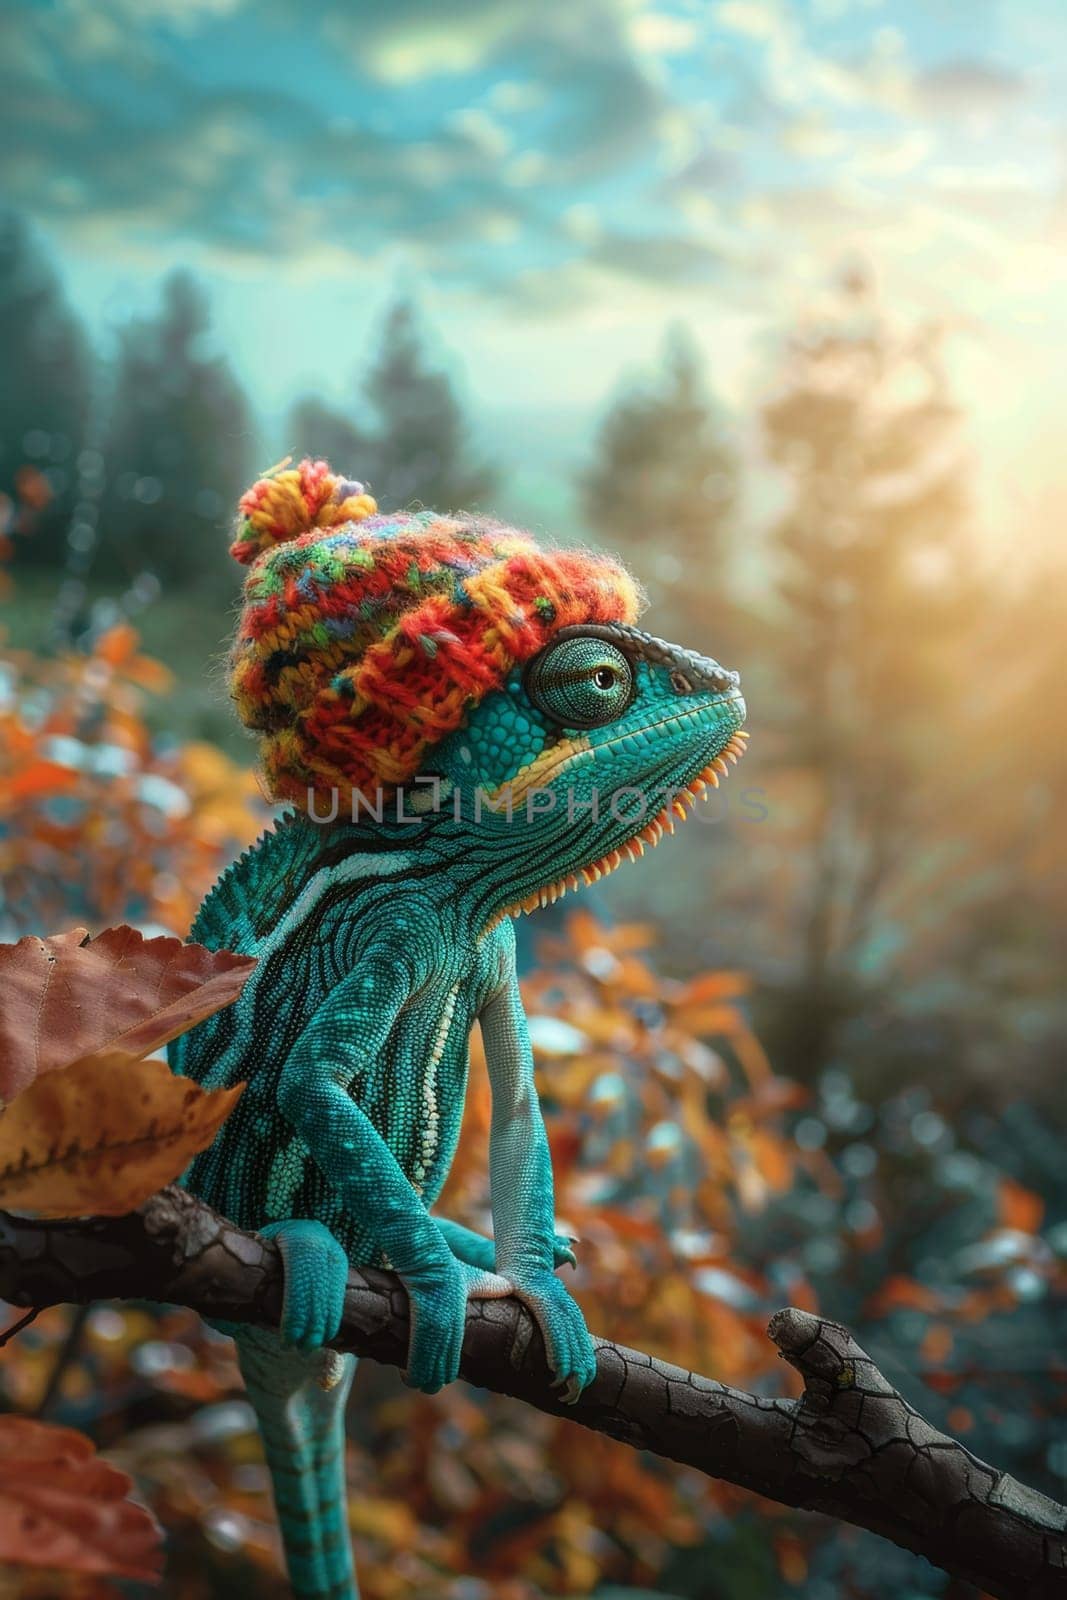 A chameleon in a bright hat on the background of a forest landscape.